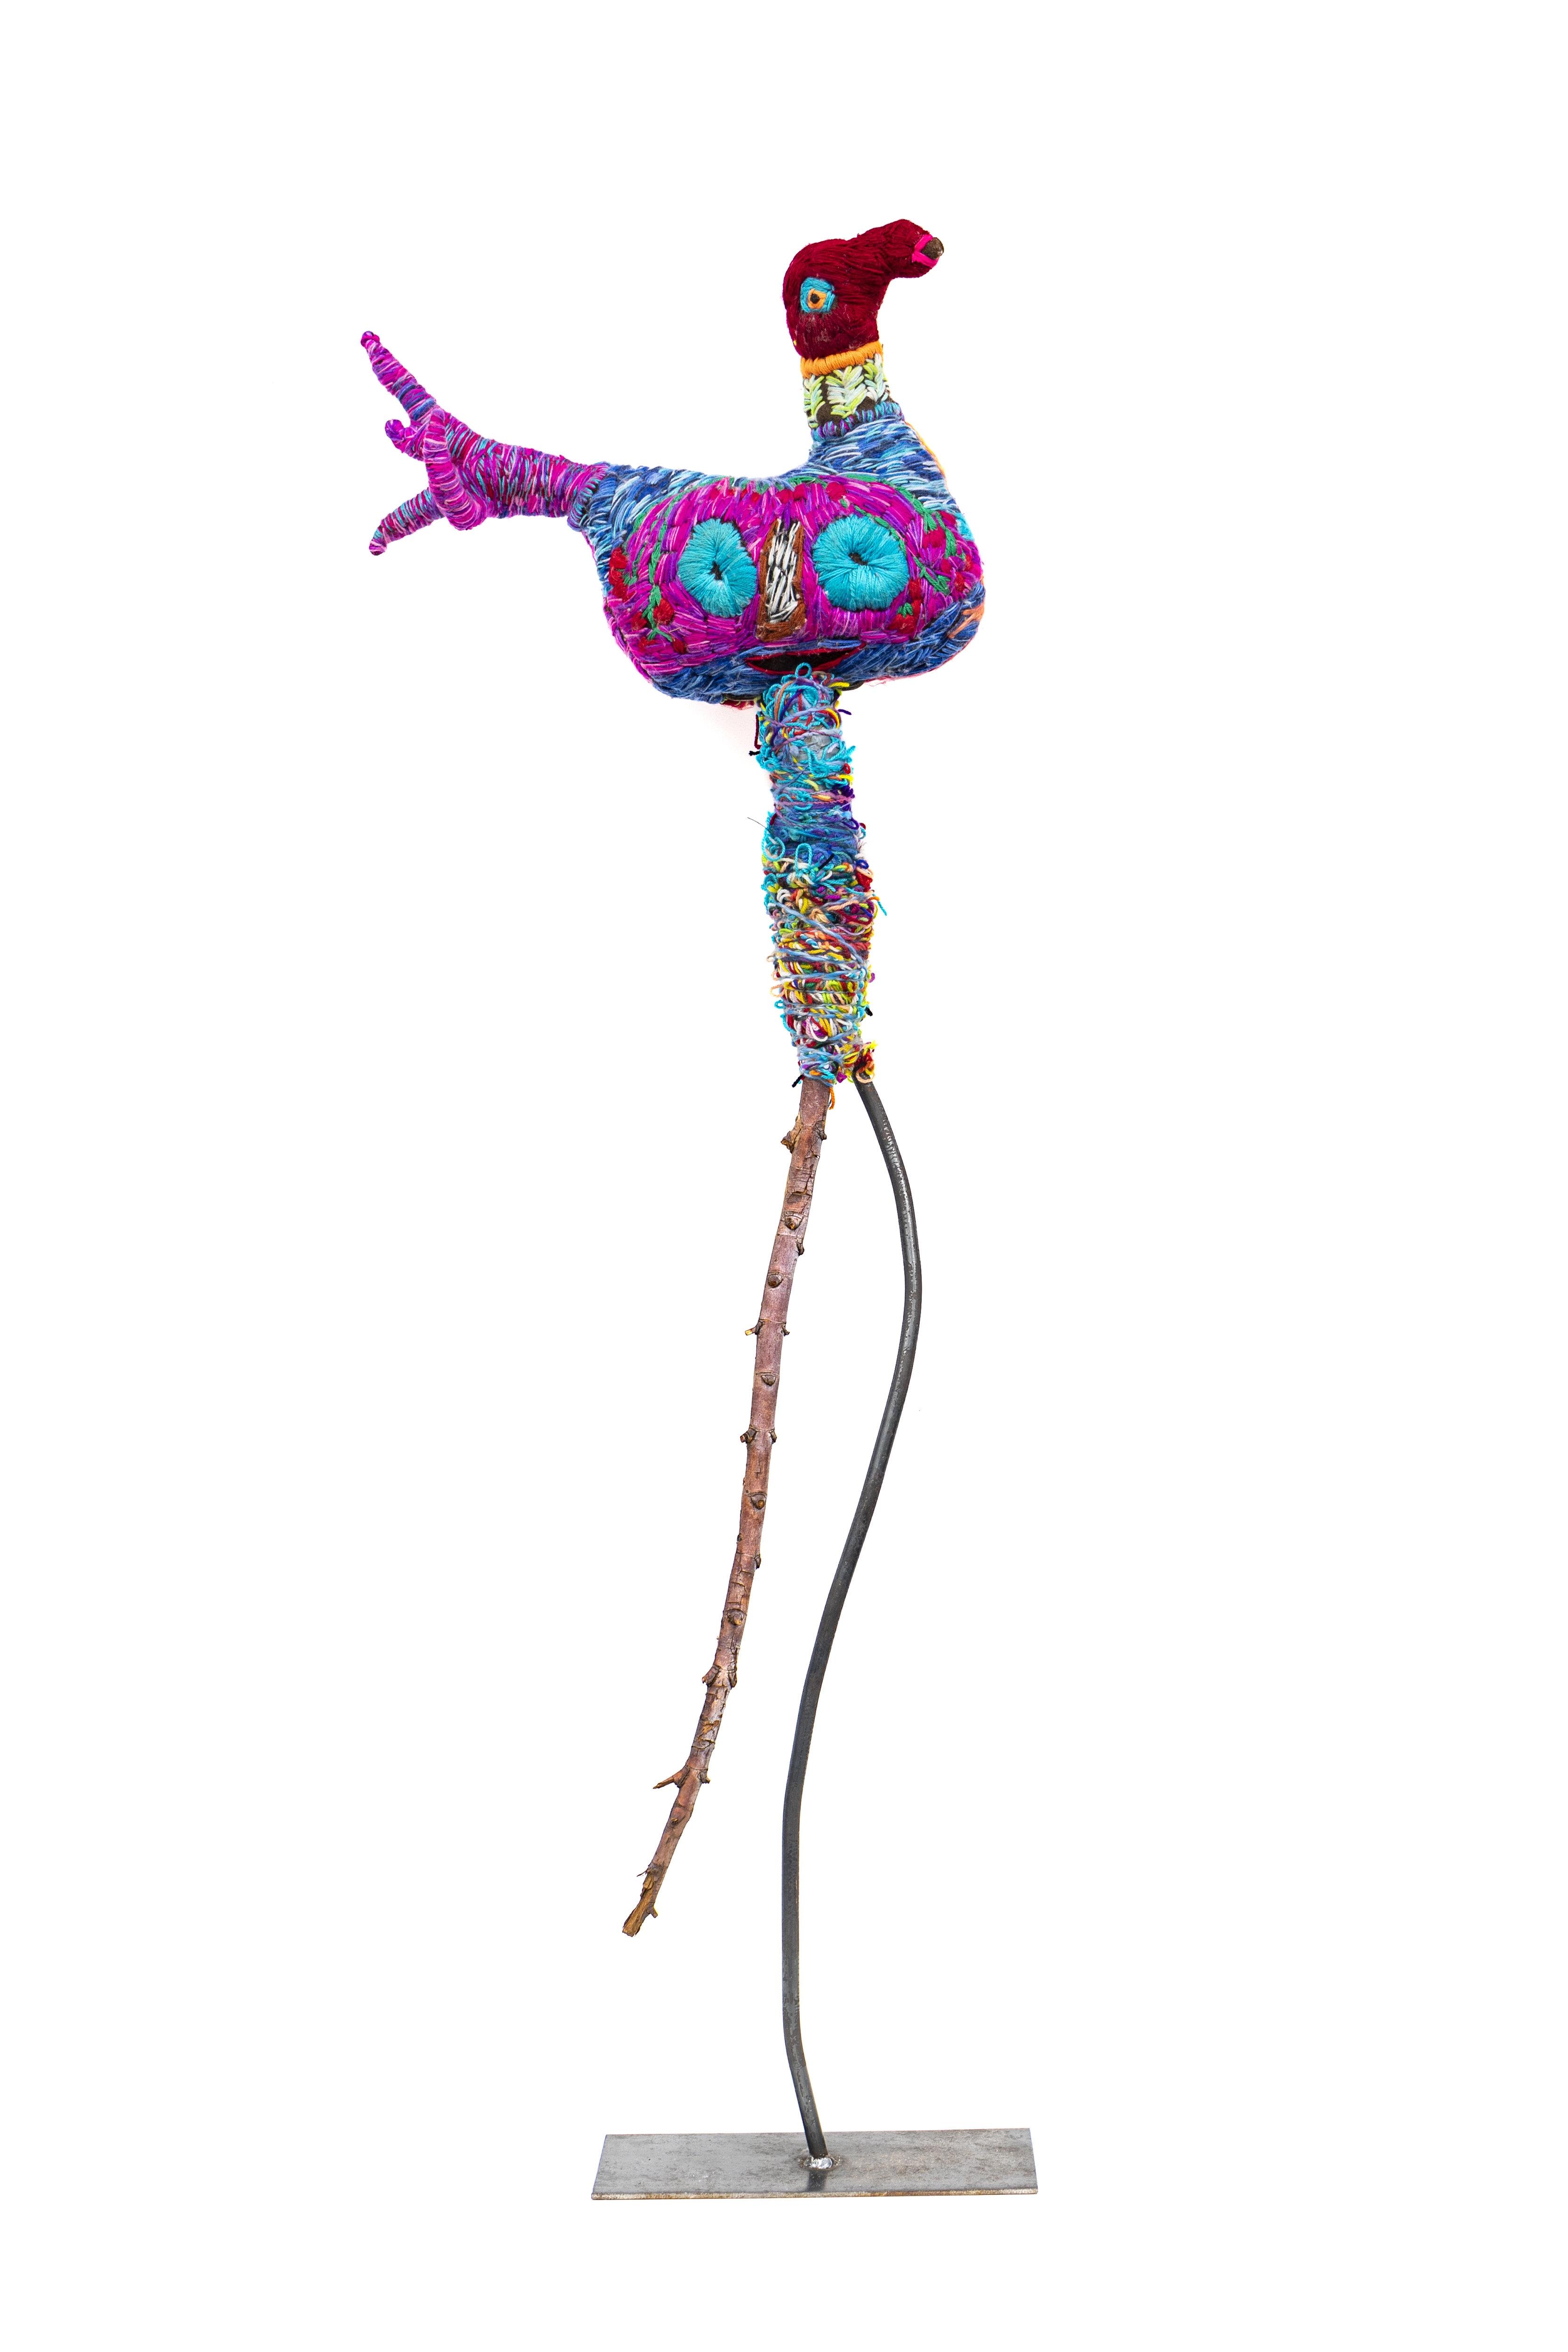 Colourful wool and acrylic yarn sculpture of a duck mounted on a metal stand.